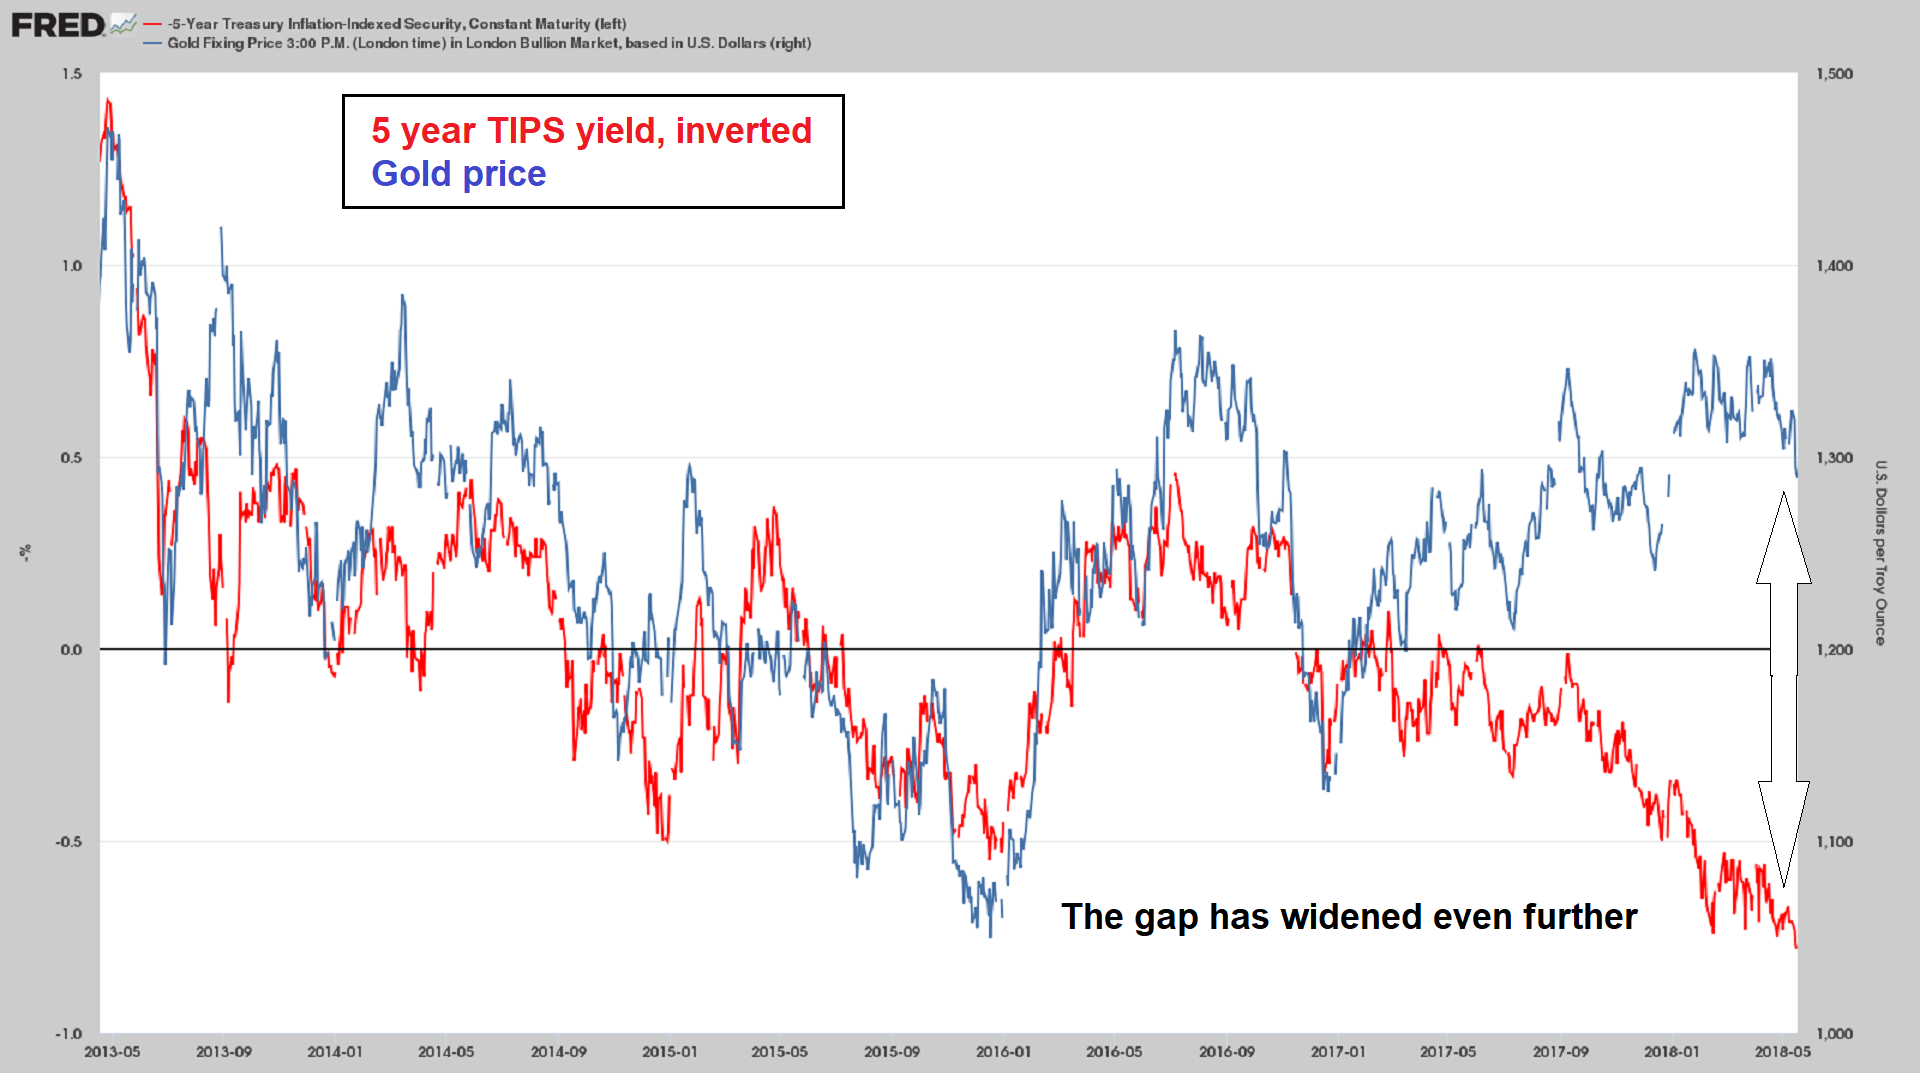 5 Year TIPS Yield Inverted vs Gold Price 2013-2018